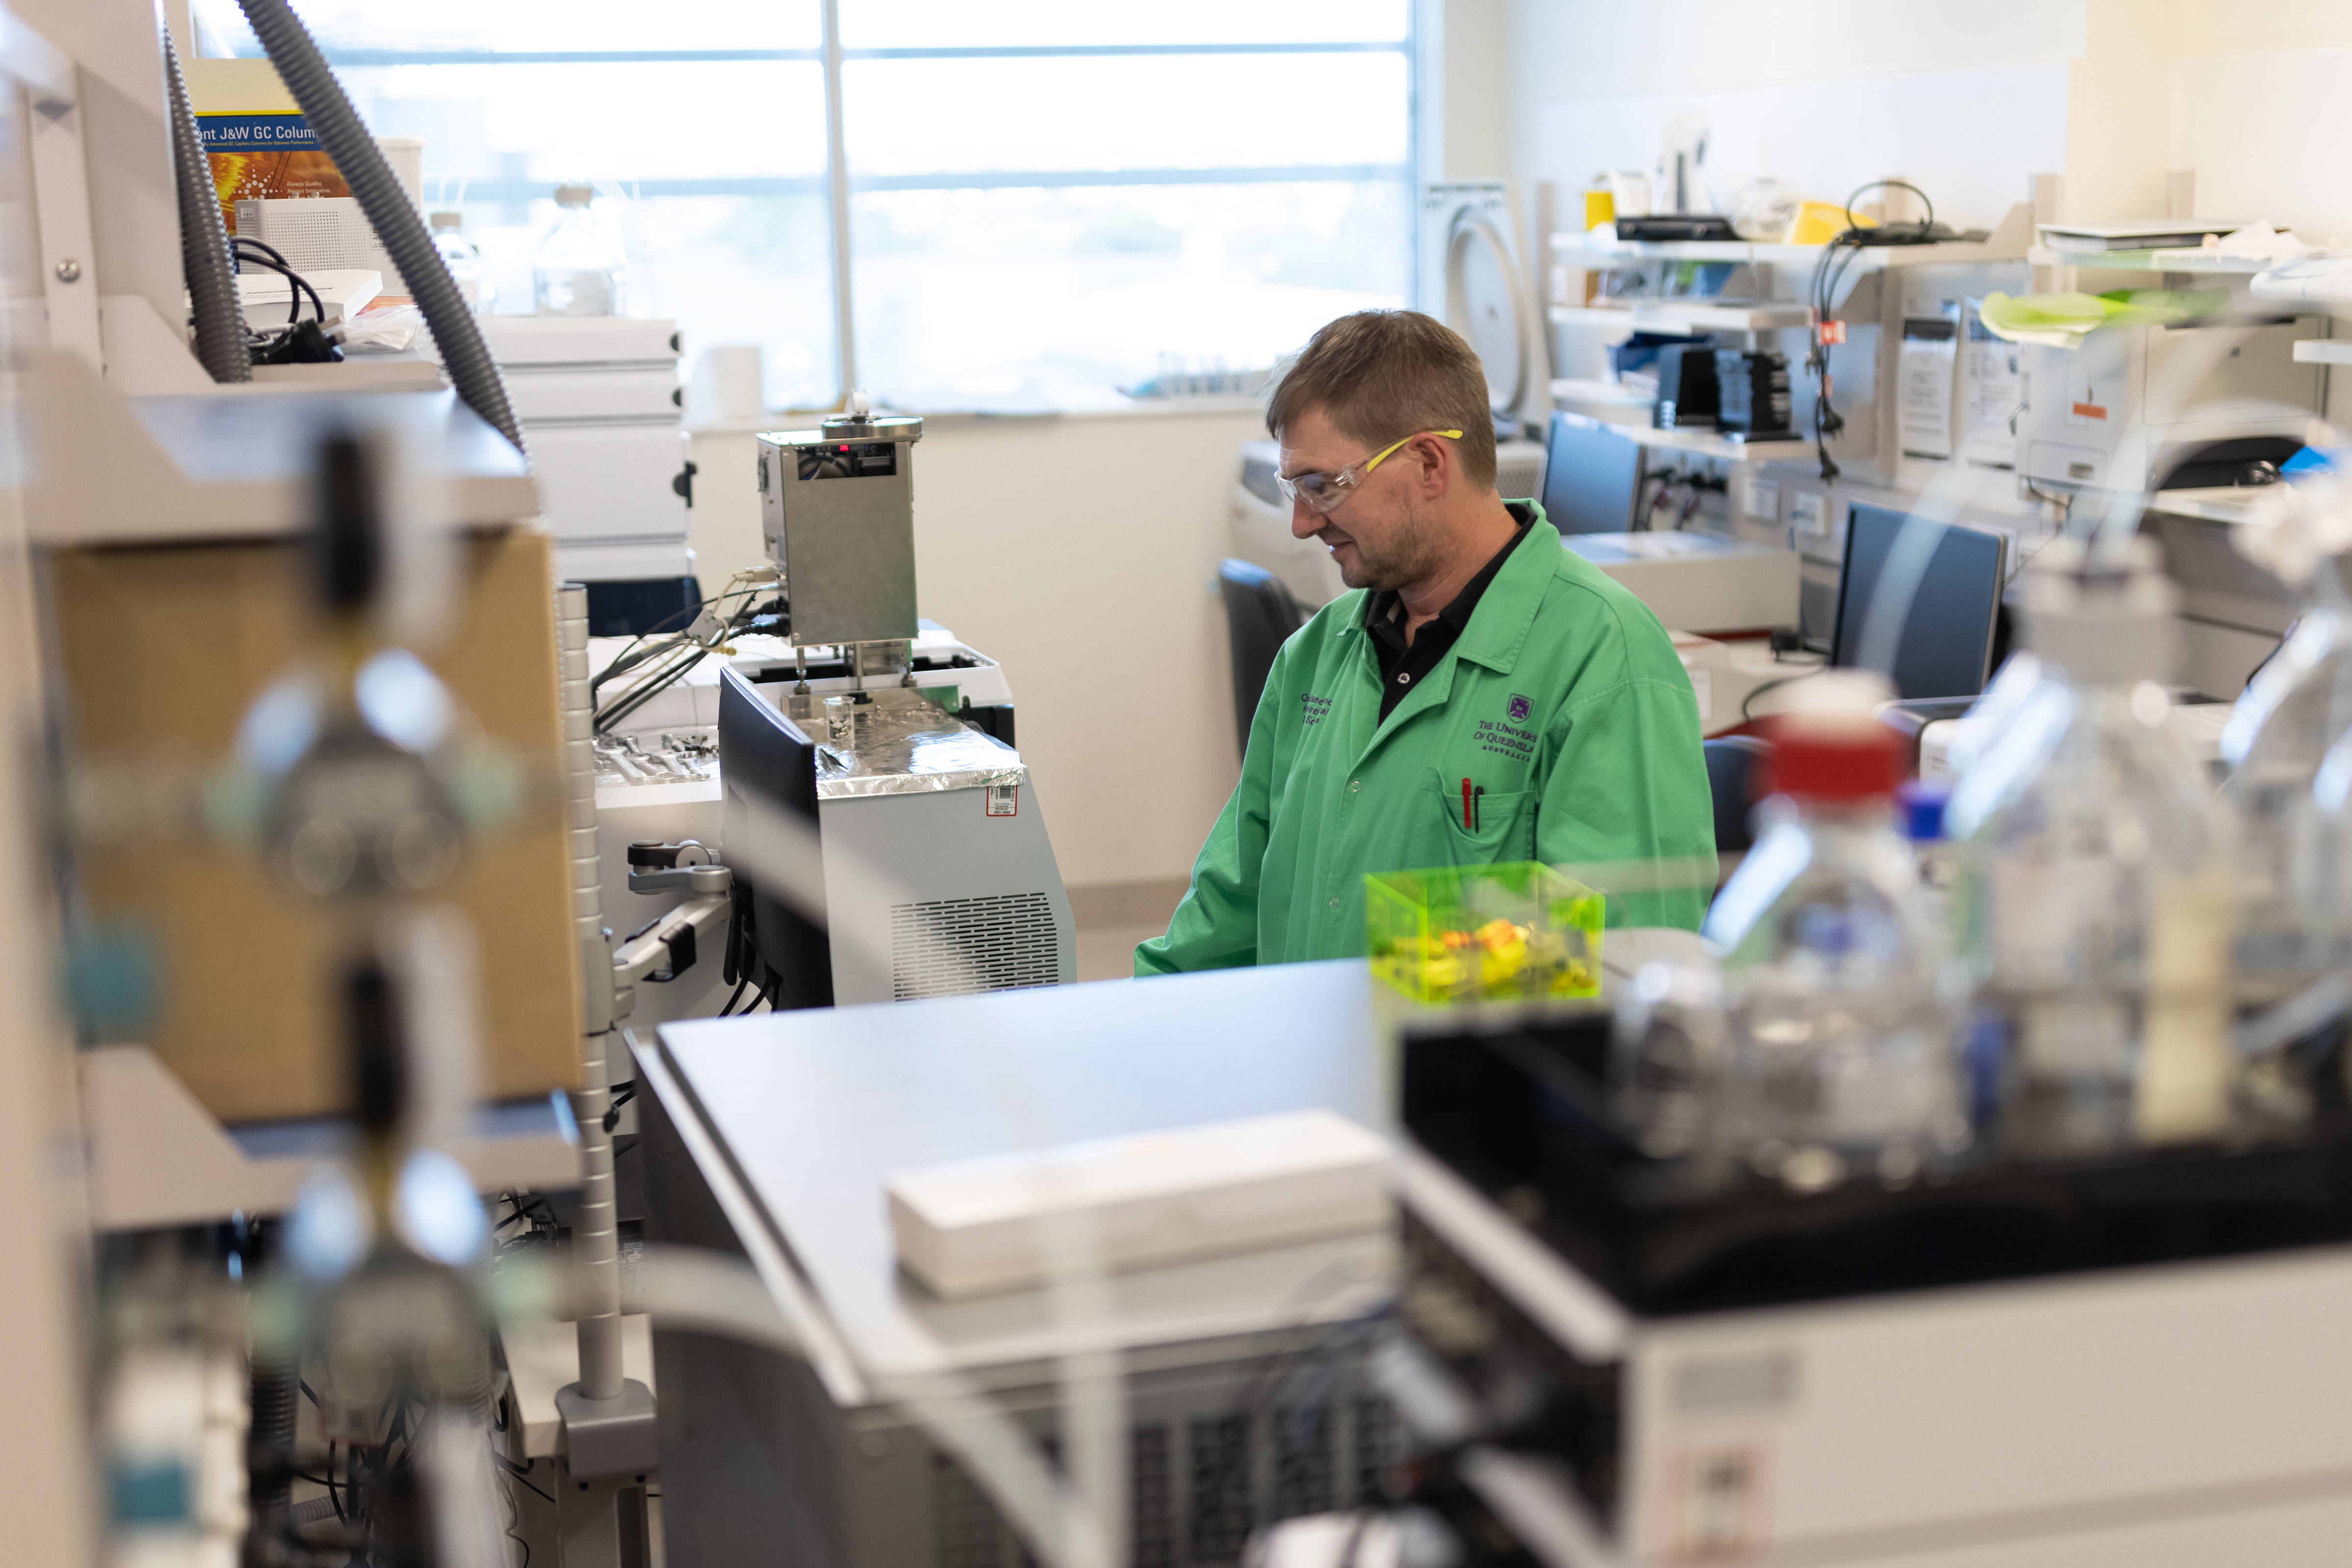 Prof Kevin Thomas in a QAEHS laboratory setting. Working on a laboratory instrument, wearing a green lab coat and protective eyewear. Photo: The University of Queensland.